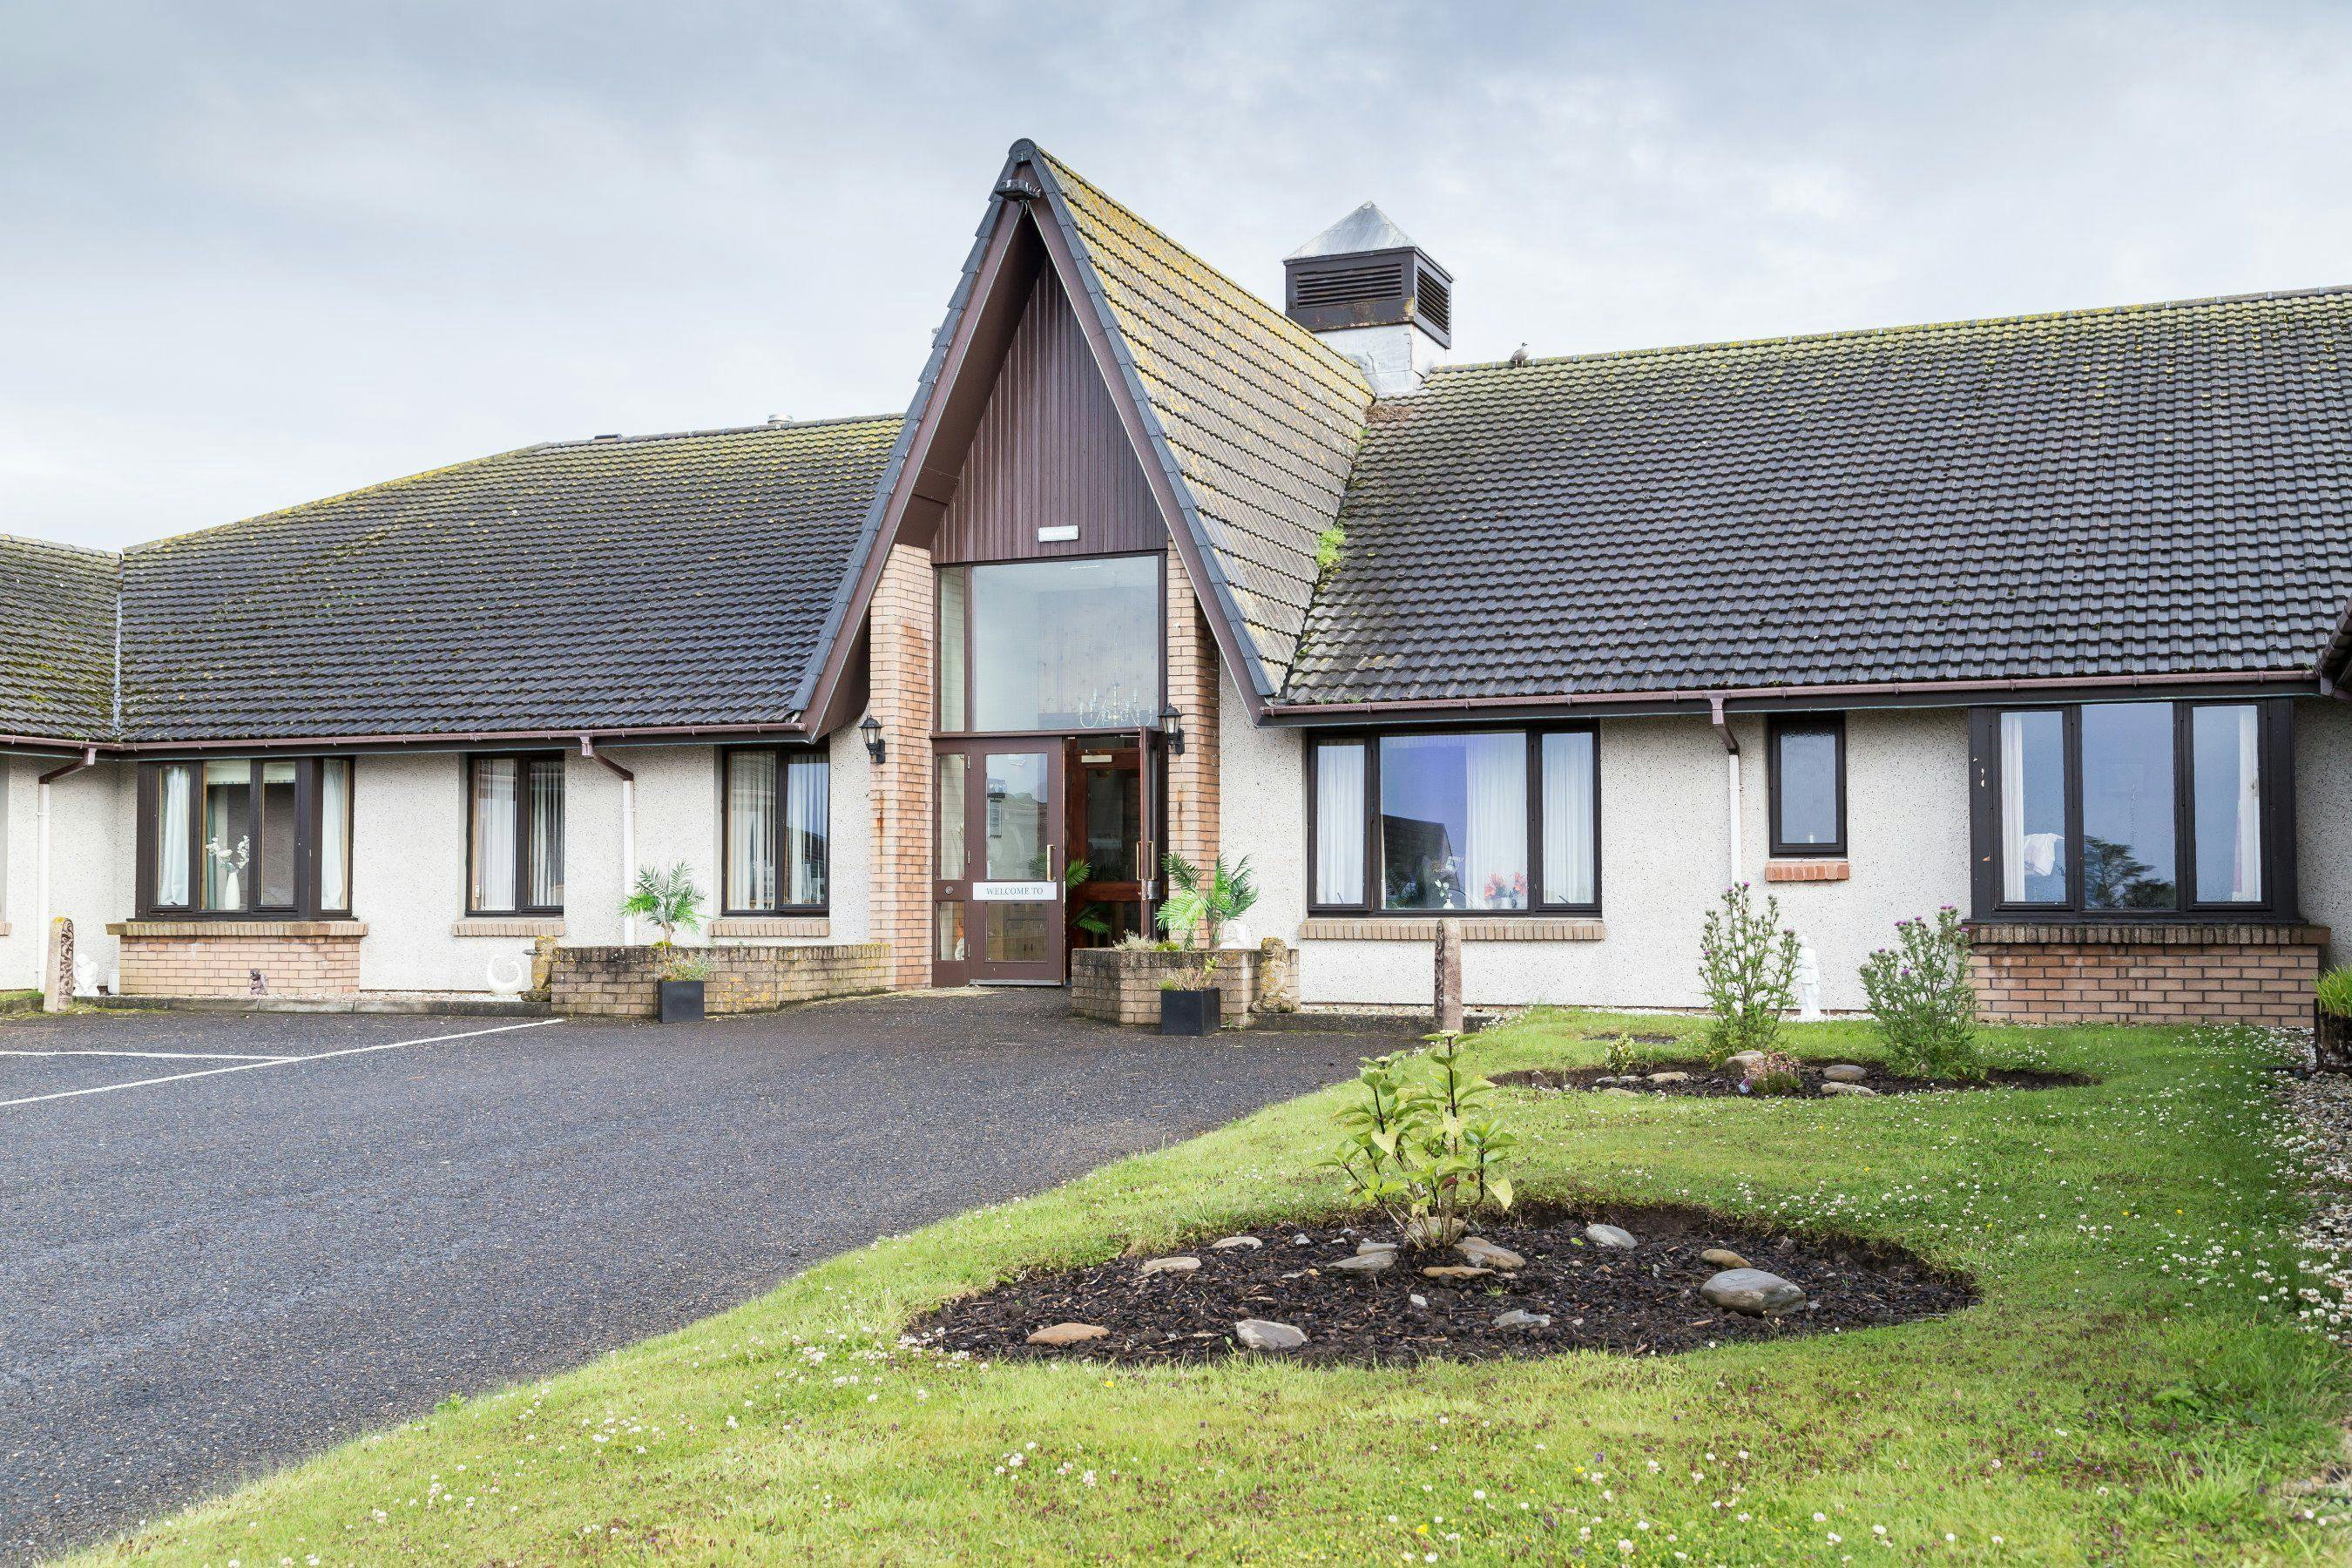 Exterior of Seaview Care Home in Wick, Highland